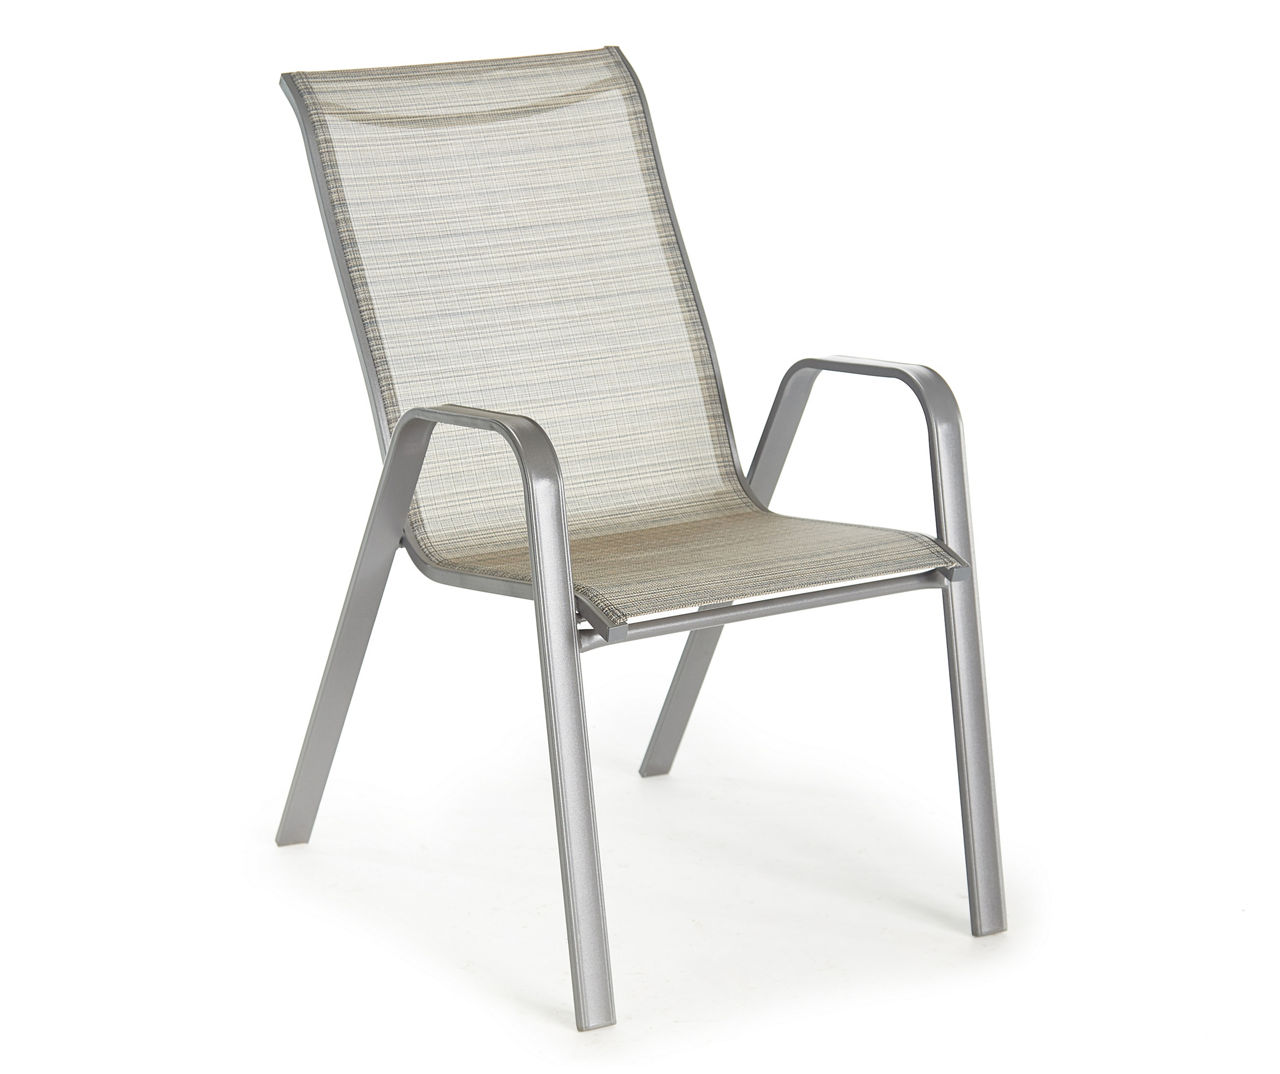 Doral Gray Sling Fabric Stacking Outdoor Dining Chair